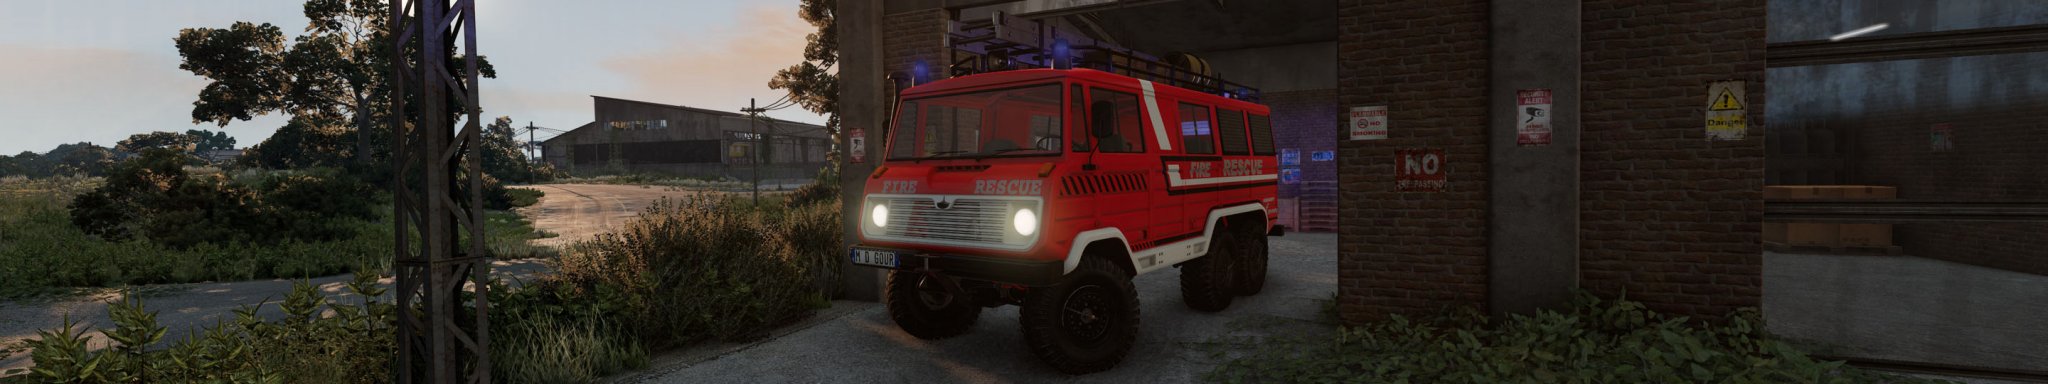 1 BeamNG STAMBECCO FP at INDUSTRIAL copy.jpg